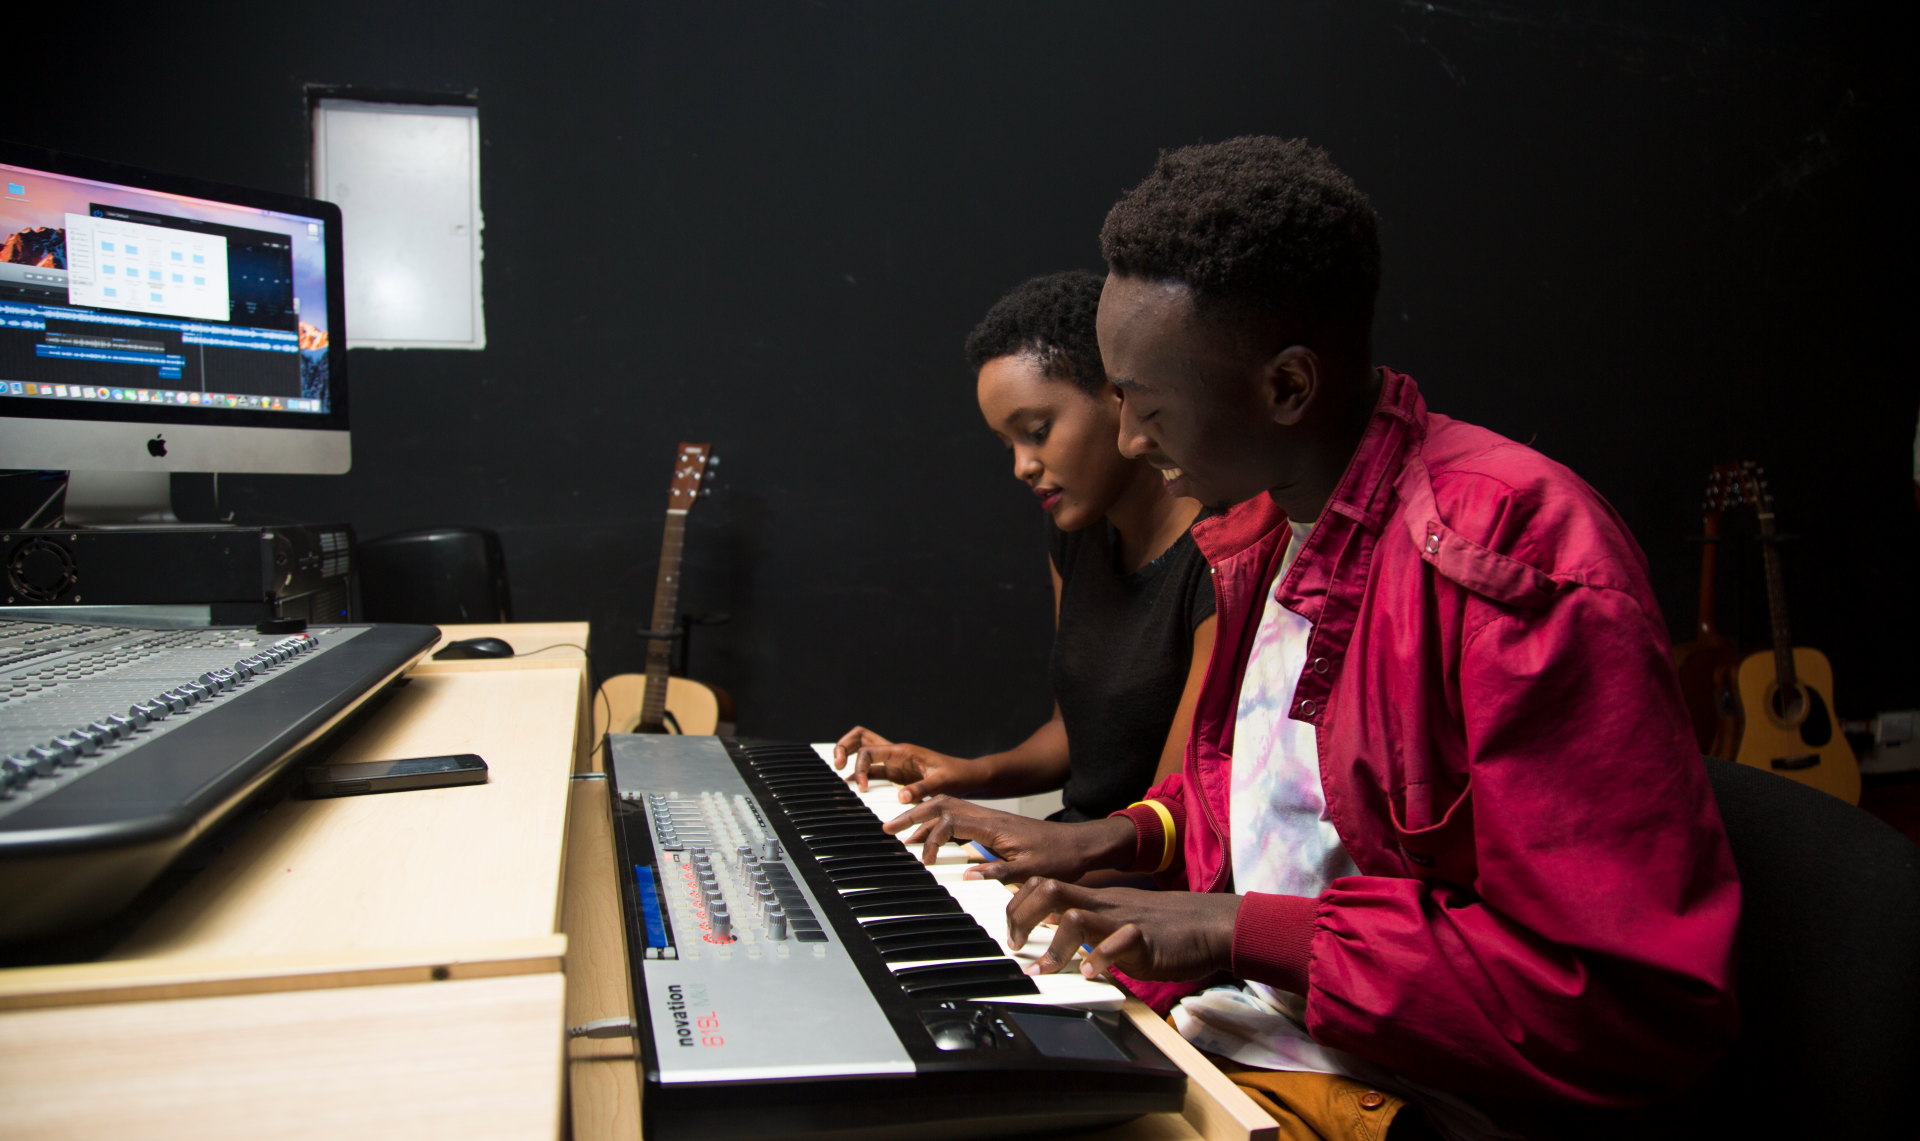 Music production is an exceptional career path Tim Rimbui a producer and founder of the record label Waabeh as well as Ennovatormusic shares his thoughts